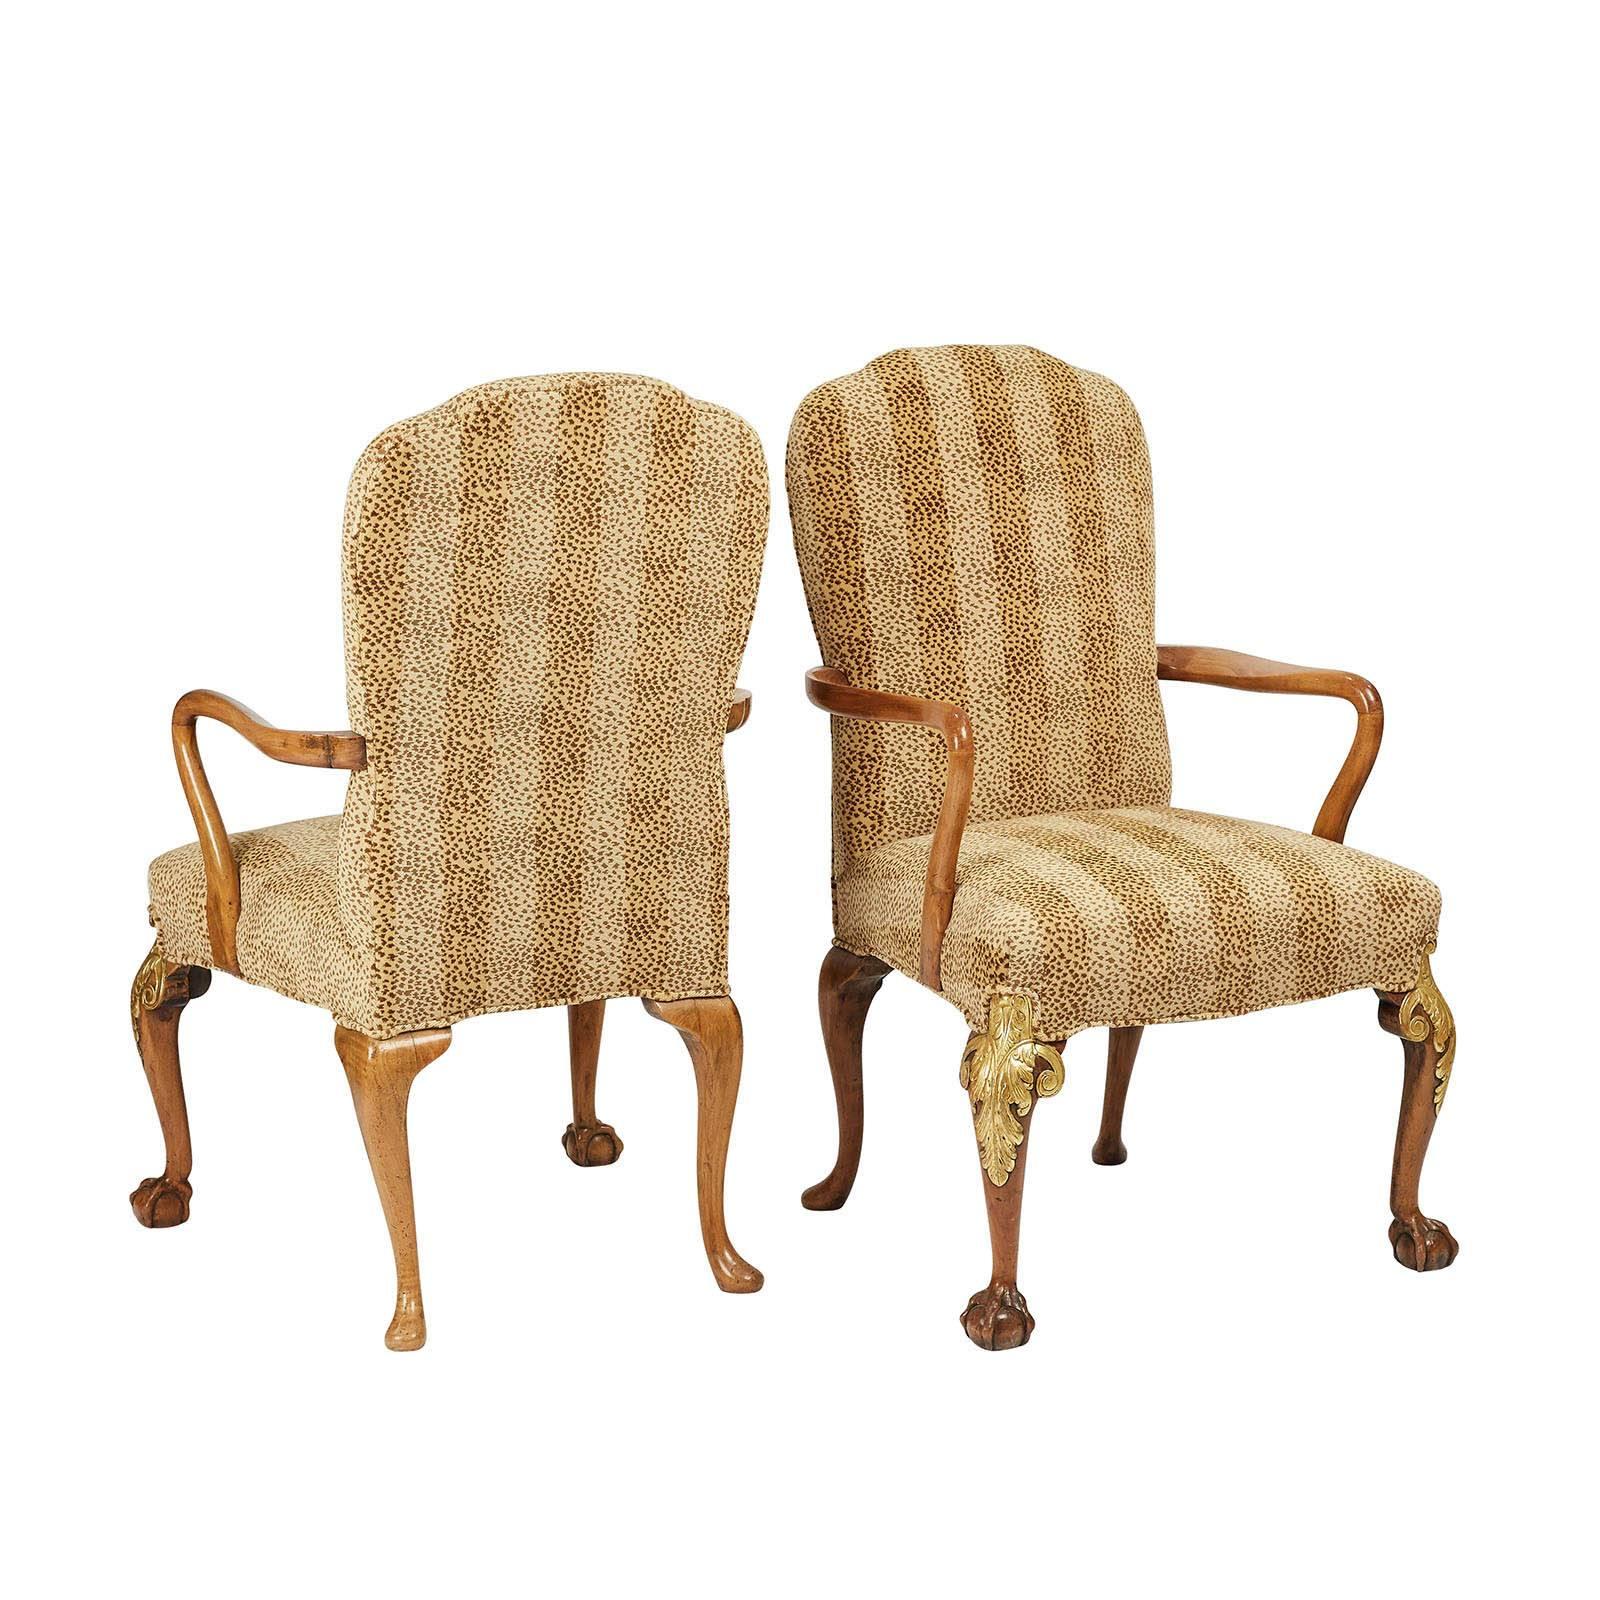 A pair of walnut armchairs in the George II style, with later gilding, circa 1890.

